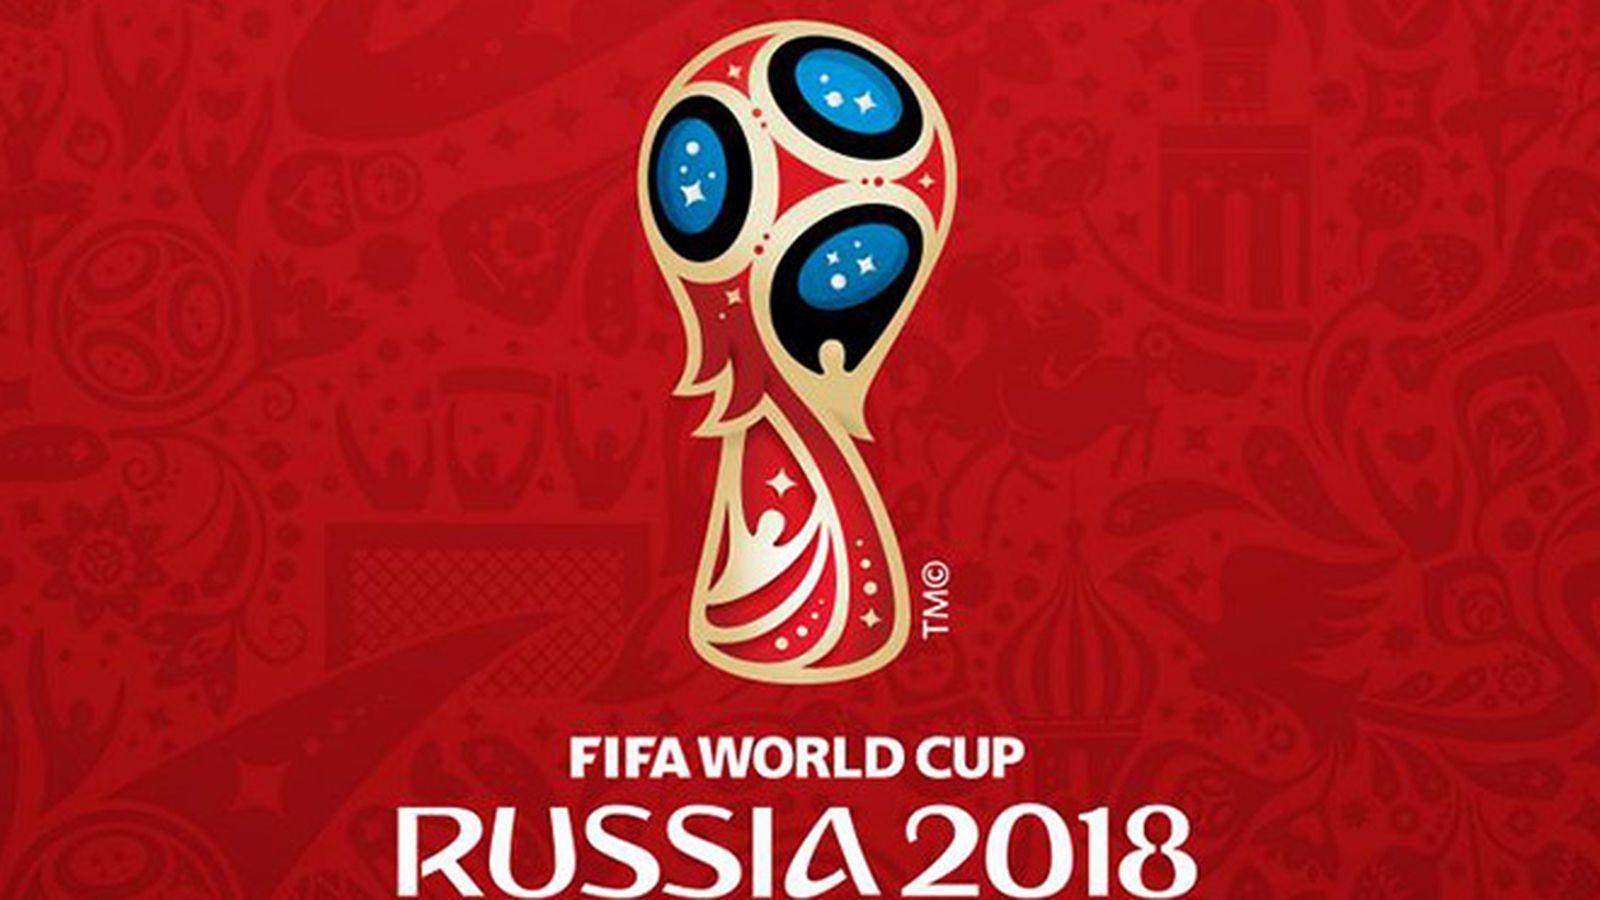 Russia released 2018 World Cup ticket price list